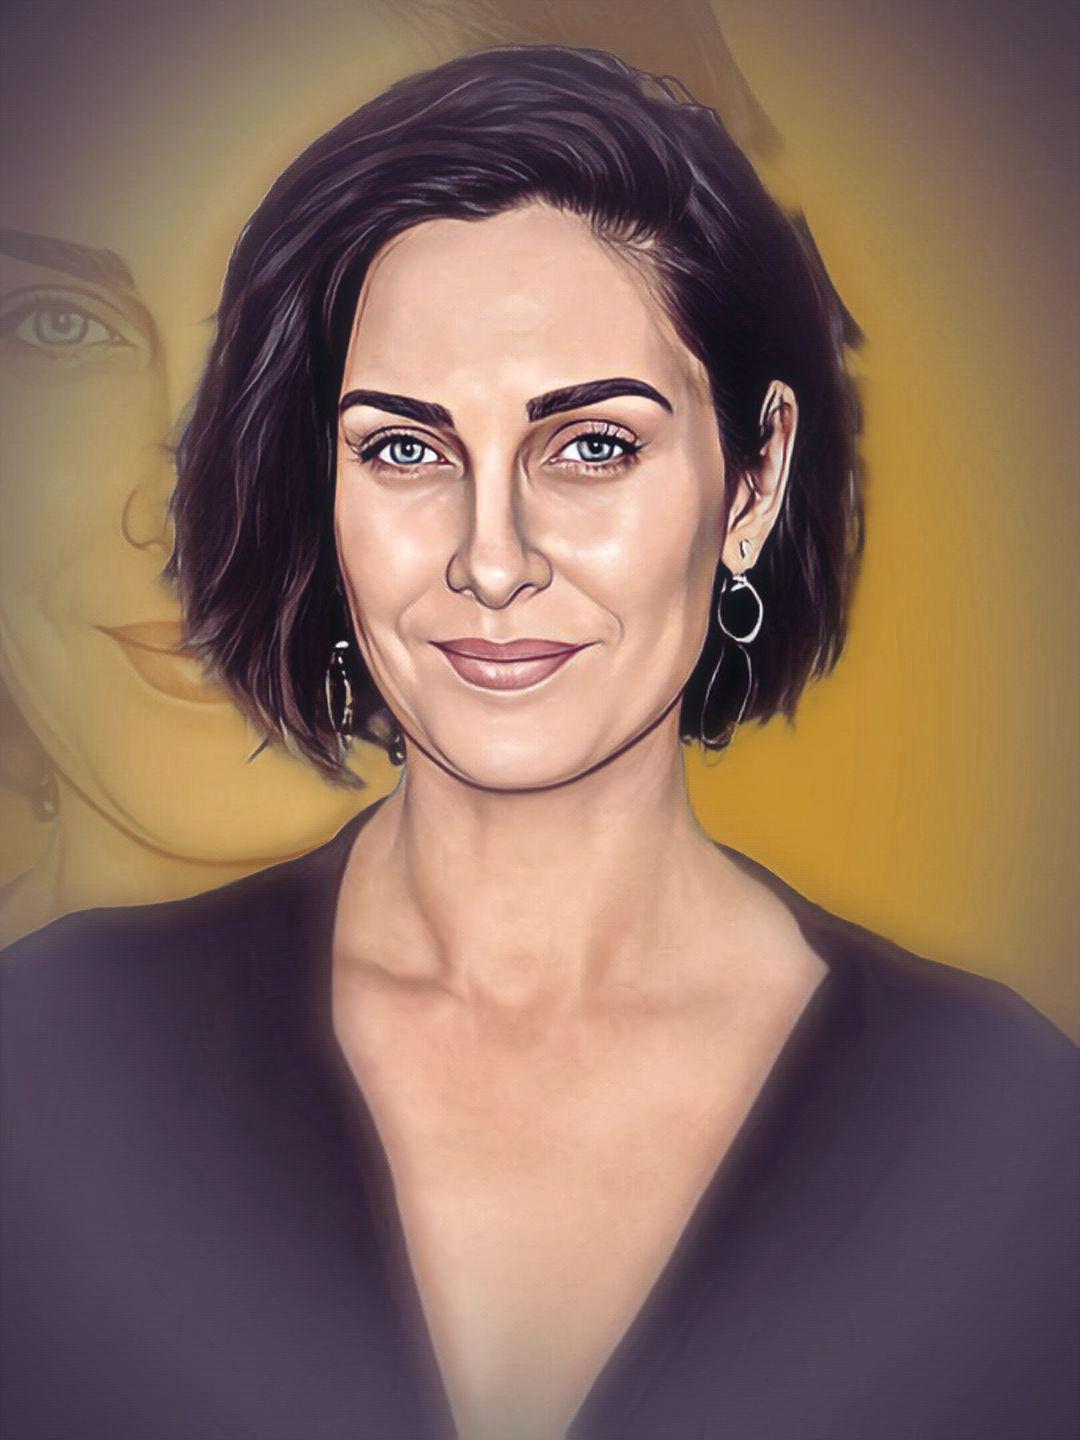 Sany Lion Sex Fucked Video Download - Carrie-Anne Moss - Celeb ART - Beautiful Artworks of Celebrities,  Footballers, Politicians and Famous People in World | OpenSea